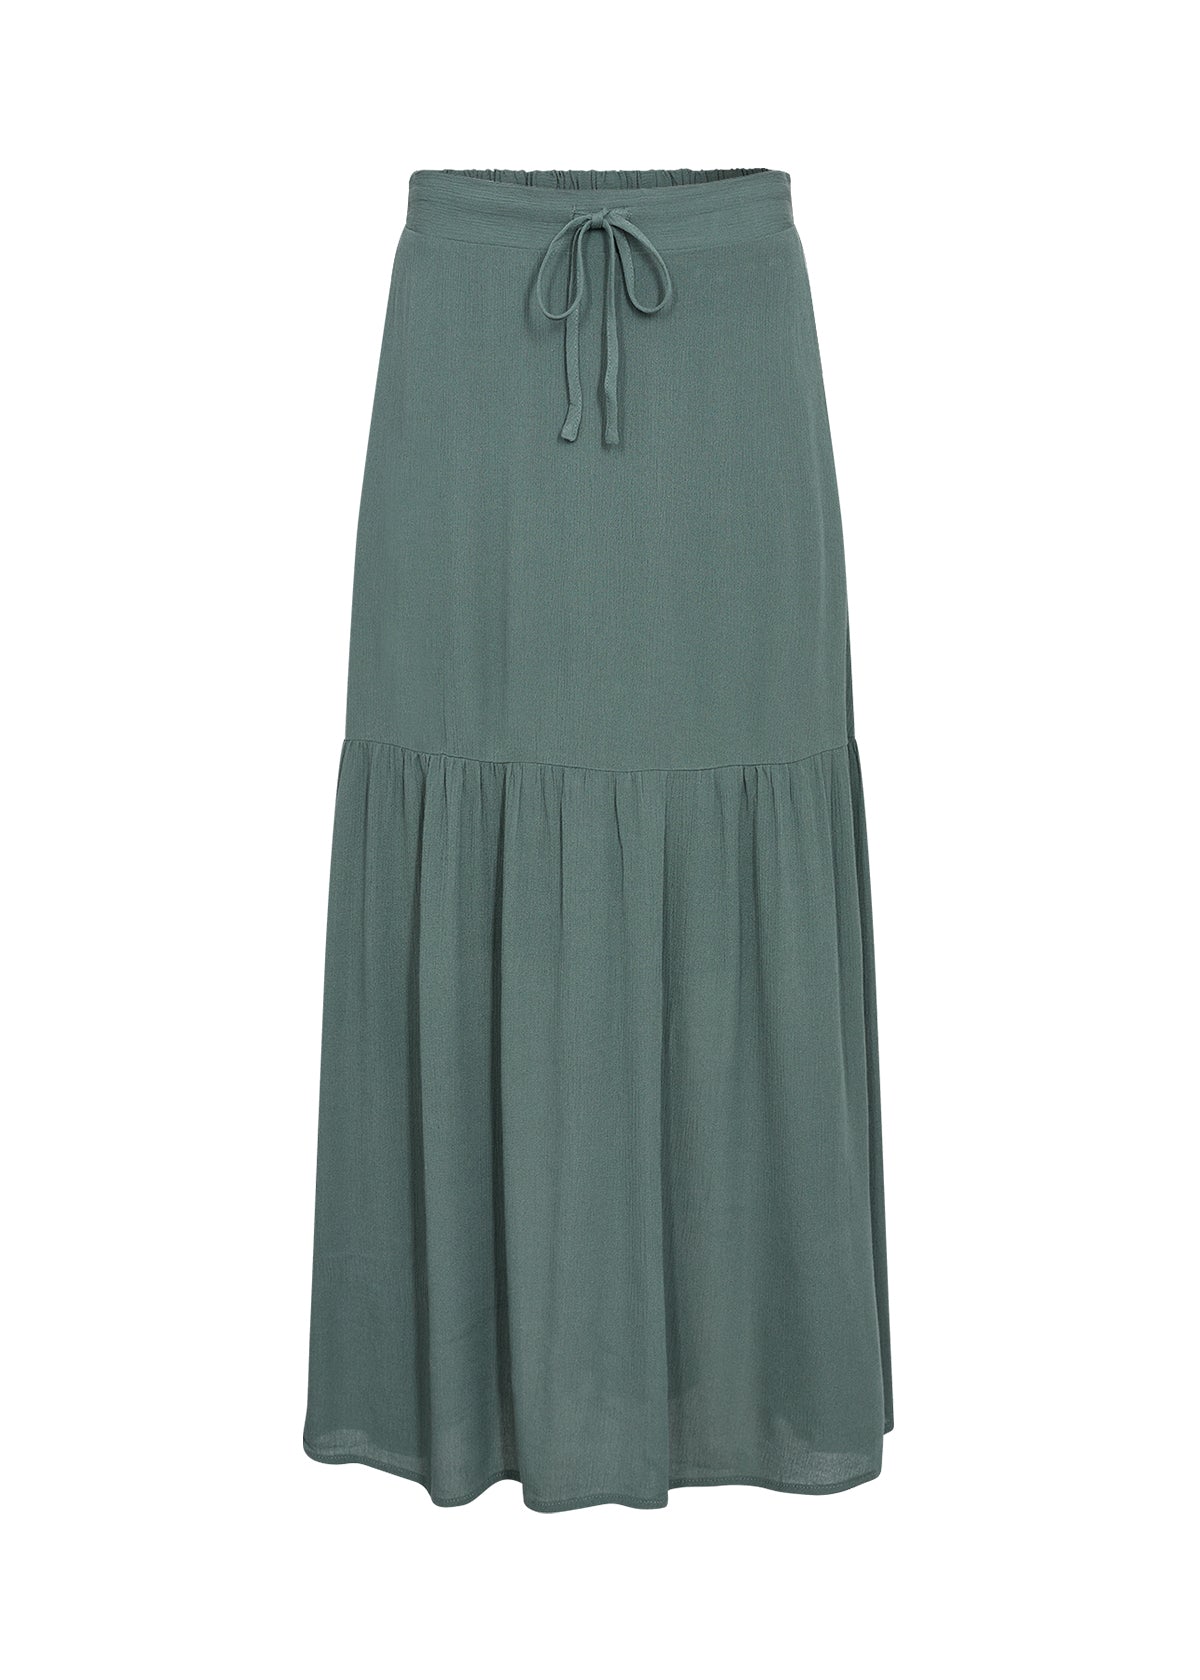 The Lani Skirt in Shadow Green